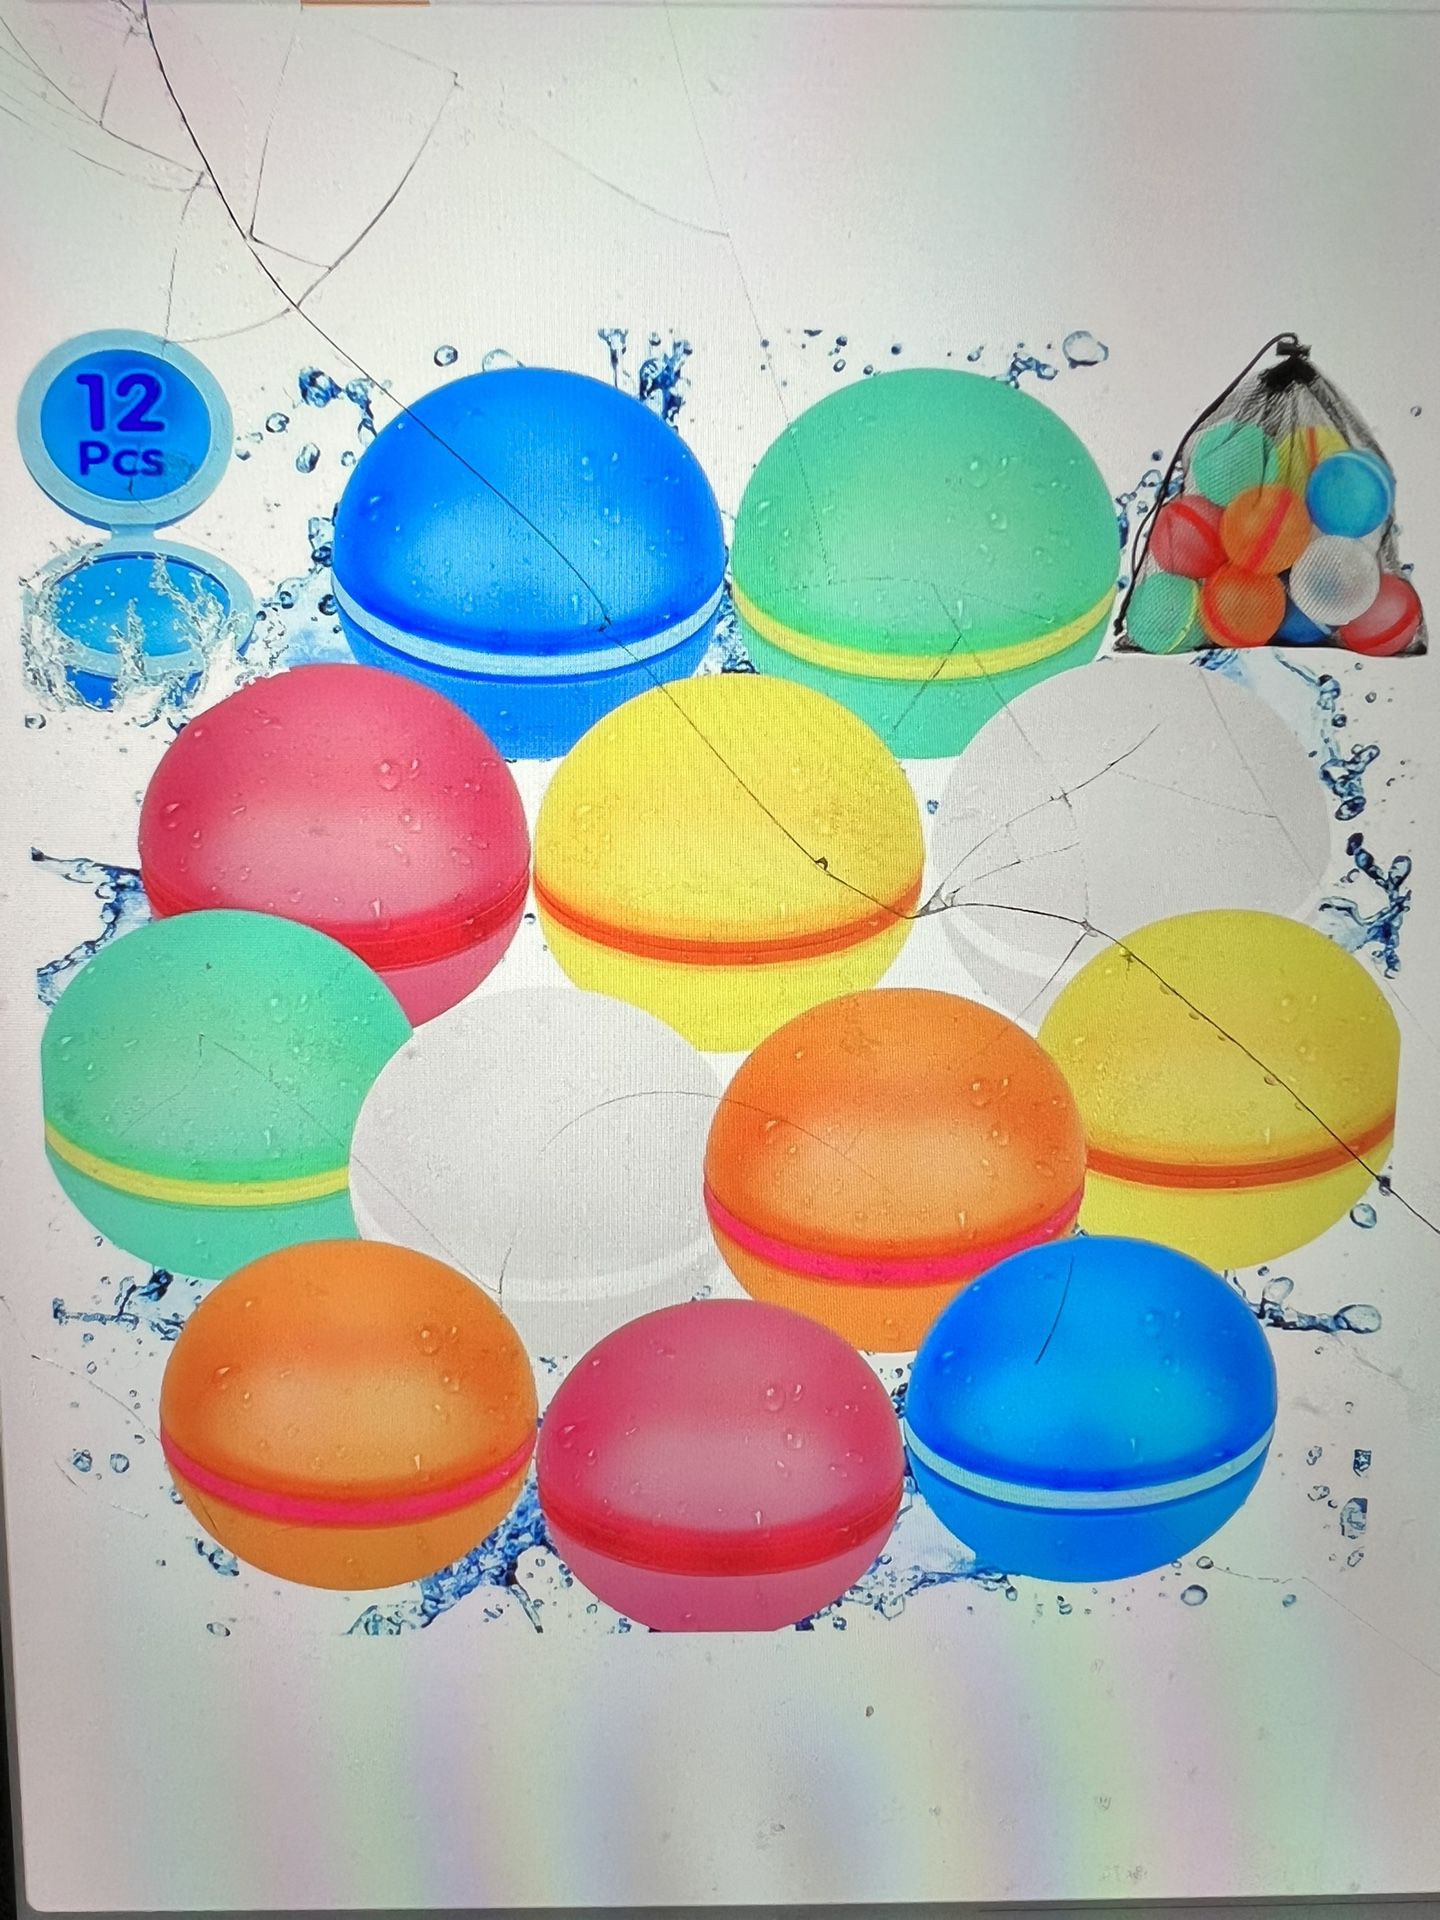 Magnetic Reusable Water Balloons for Kids: 12PCS Refillable Water Balloons Quick Fill Self-Sealing Water Bomb Toys Splash Balls for Summer Party Pool 